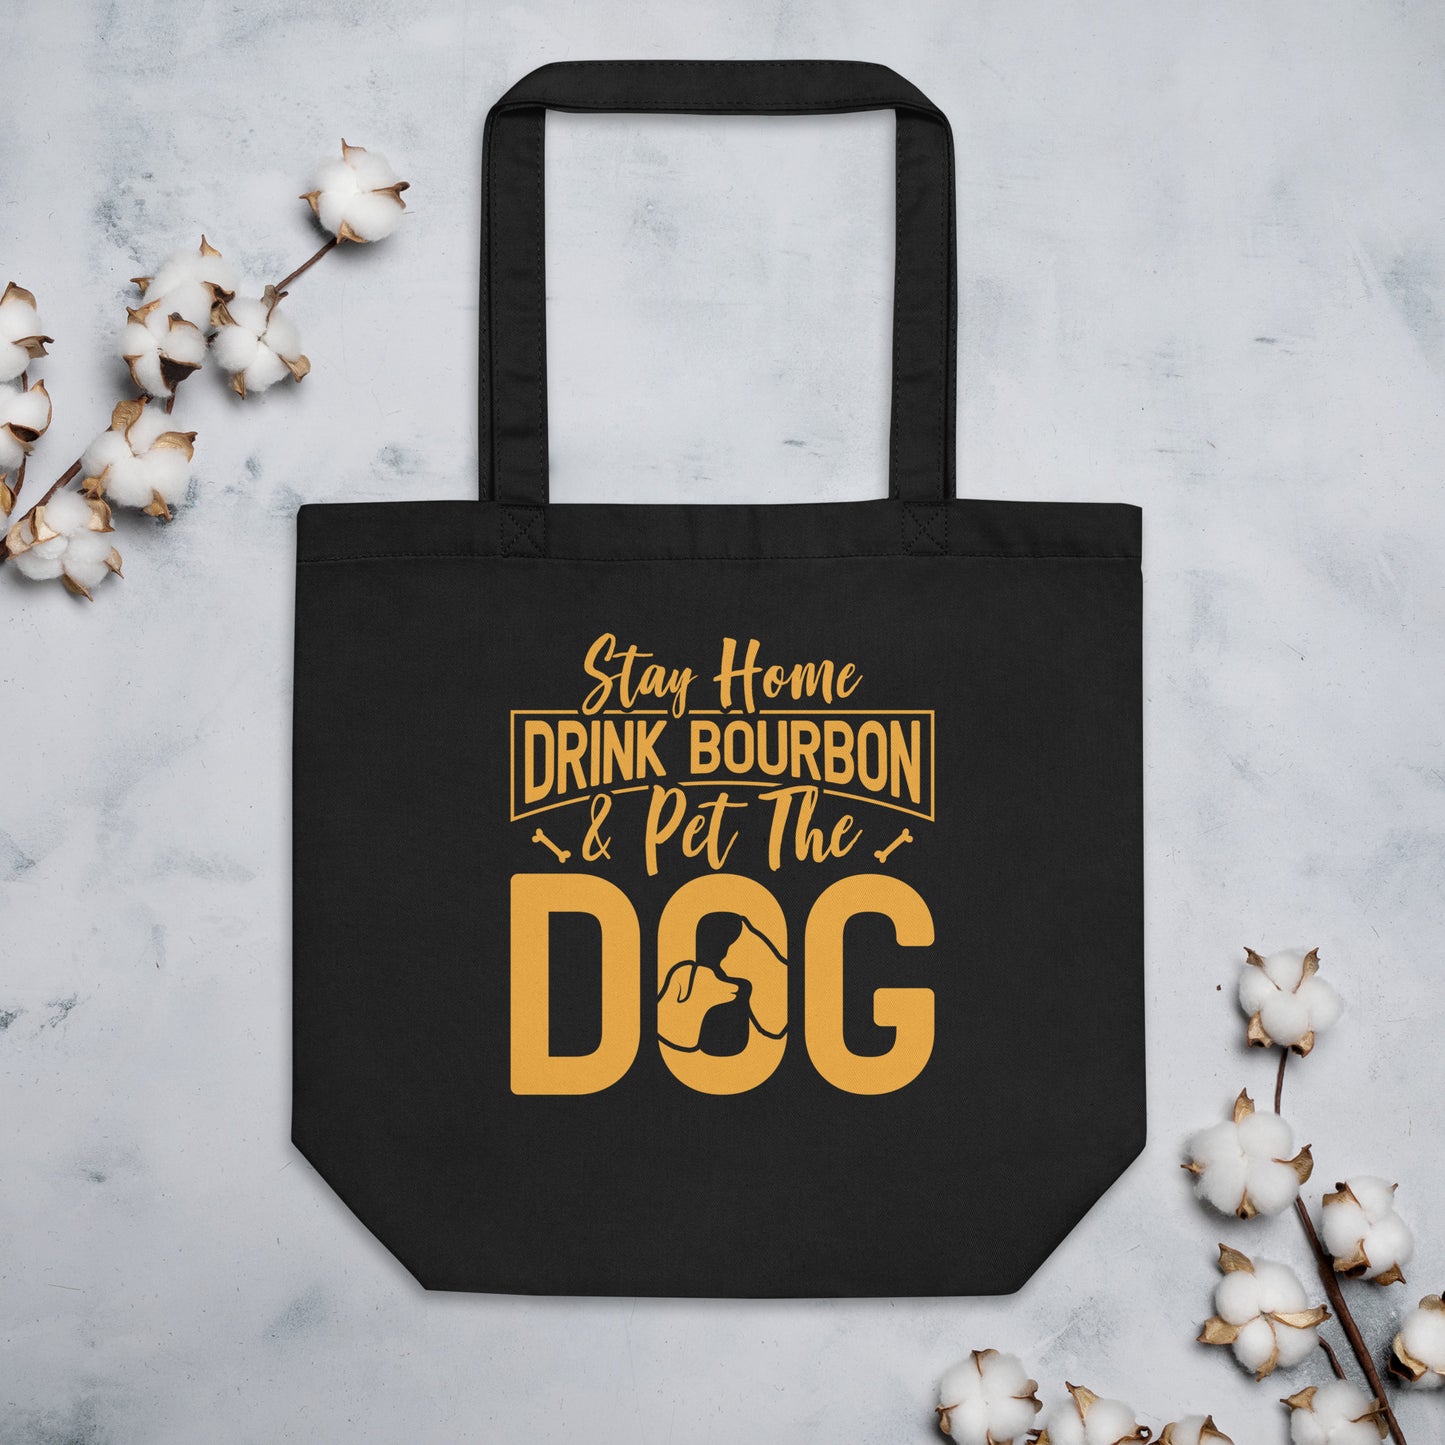 Stay Home Drink Bourbon Pet the Dog Eco Tote Bag